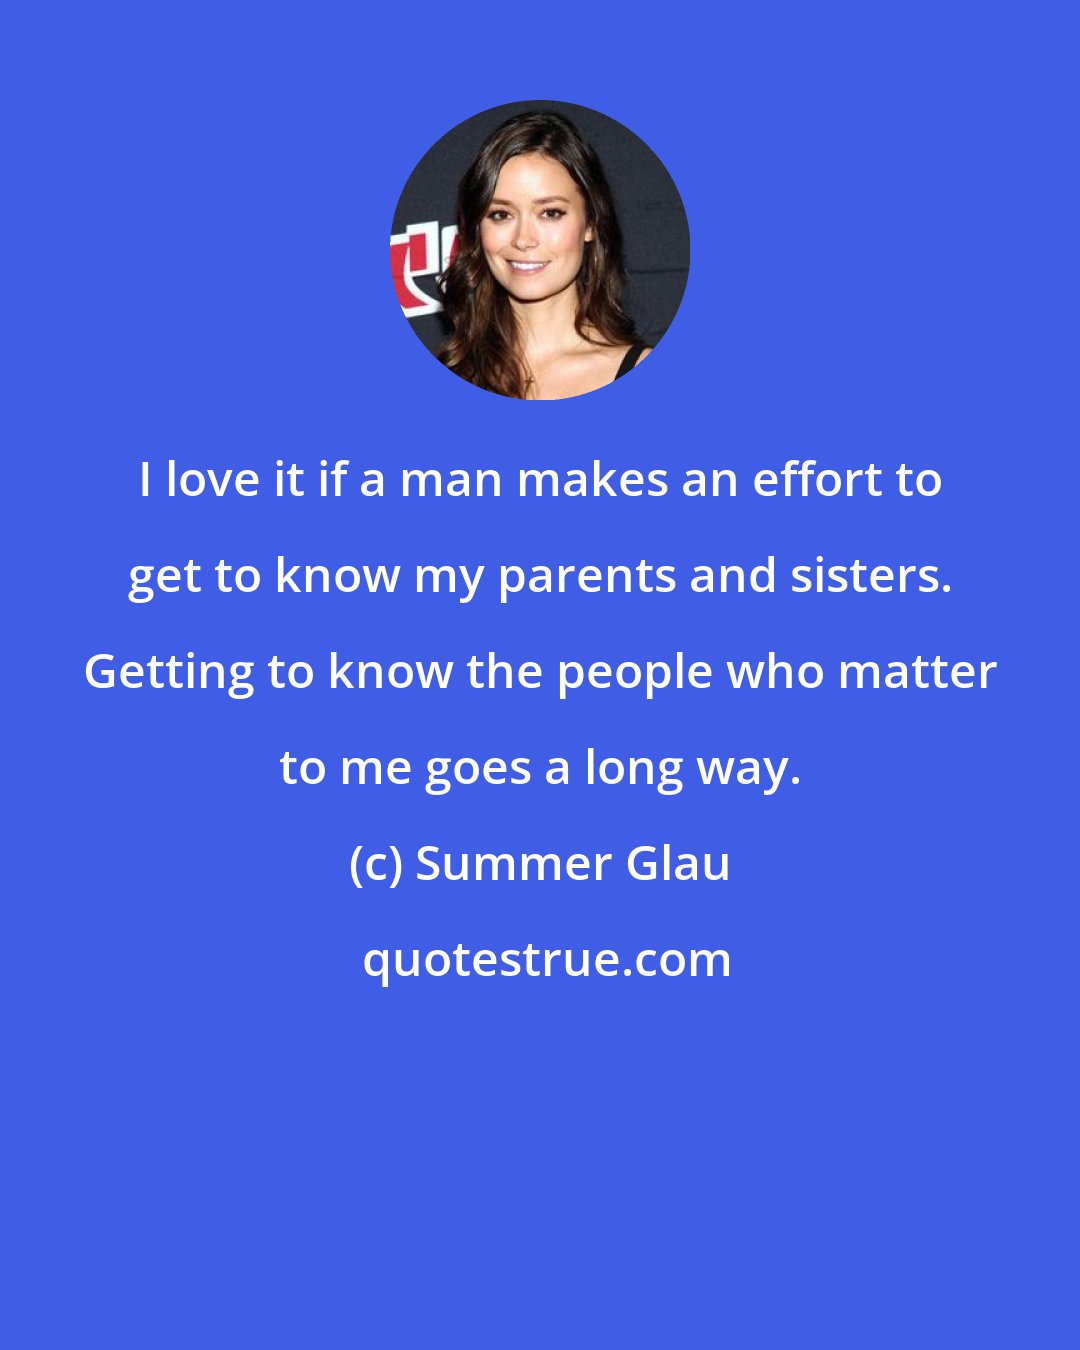 Summer Glau: I love it if a man makes an effort to get to know my parents and sisters. Getting to know the people who matter to me goes a long way.